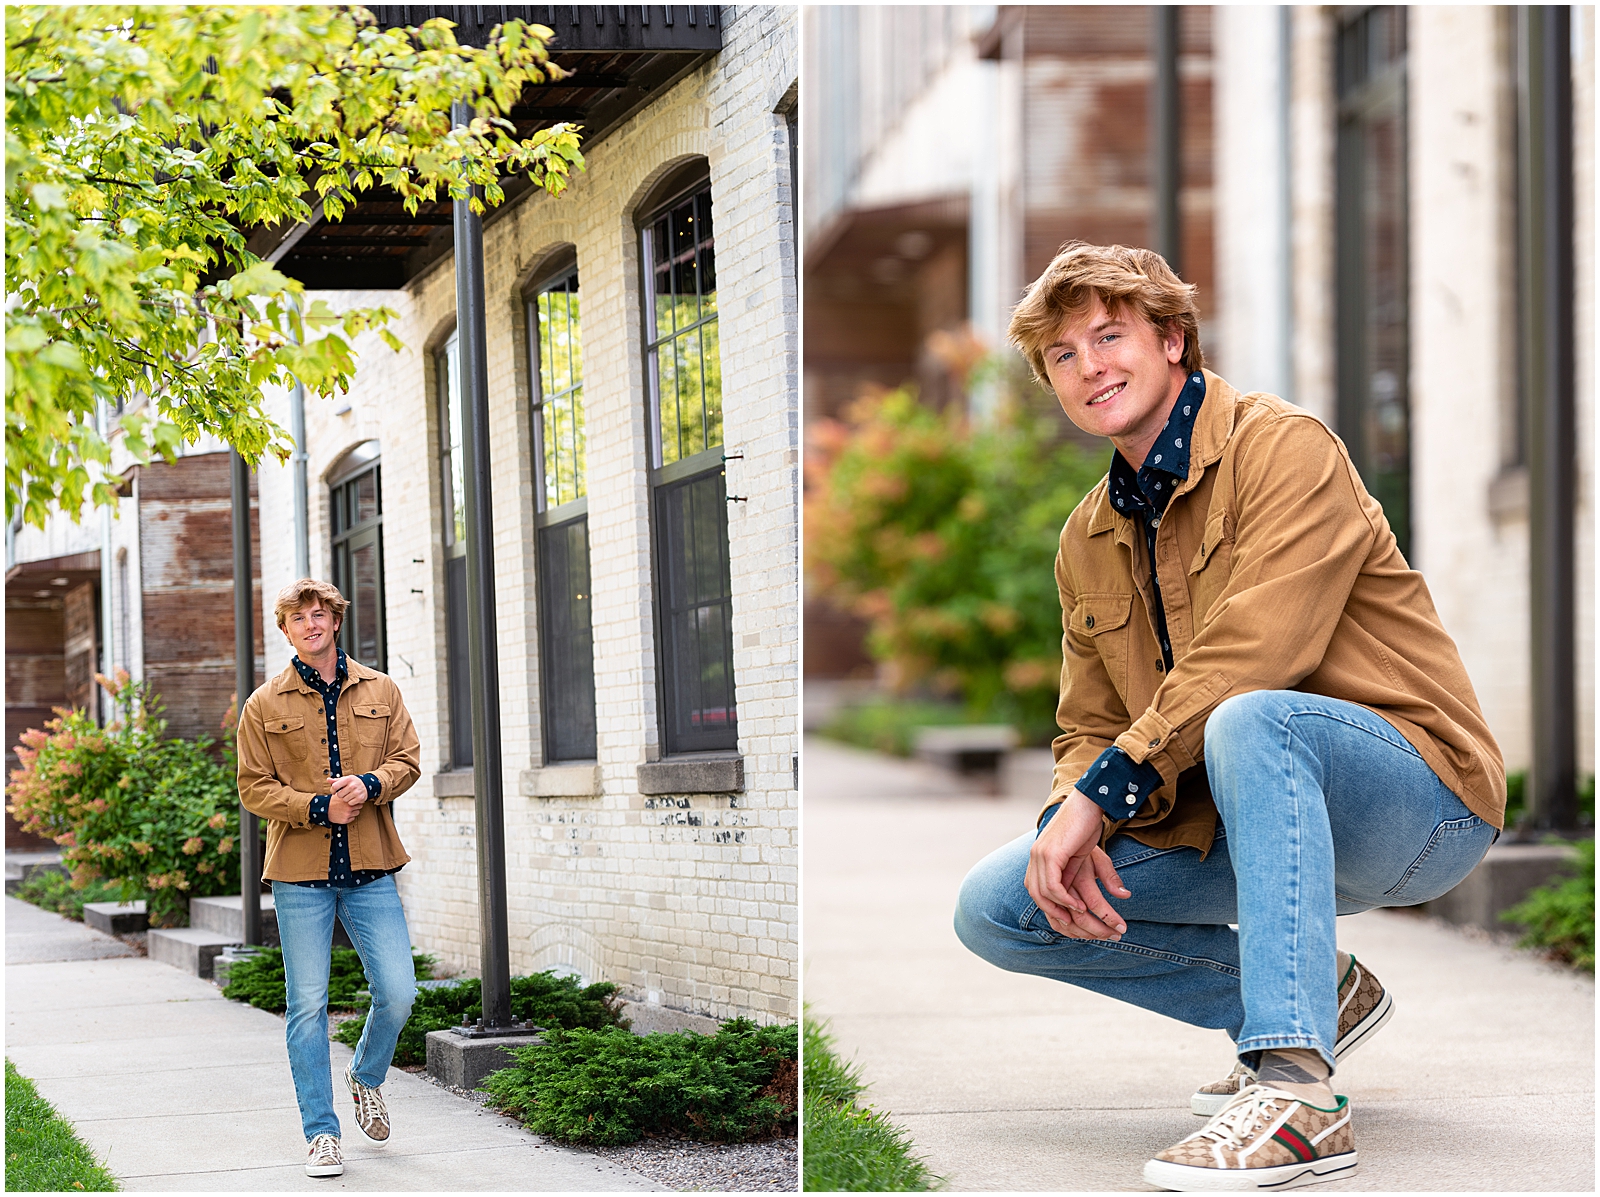 Preparing for your senior photos – urban senior boy photo inspiration with brown jacket jeans and Gucci sneakers – Sarah Jane Photography is a high school senior photographer serving Bourbonnais & Chicagoland.